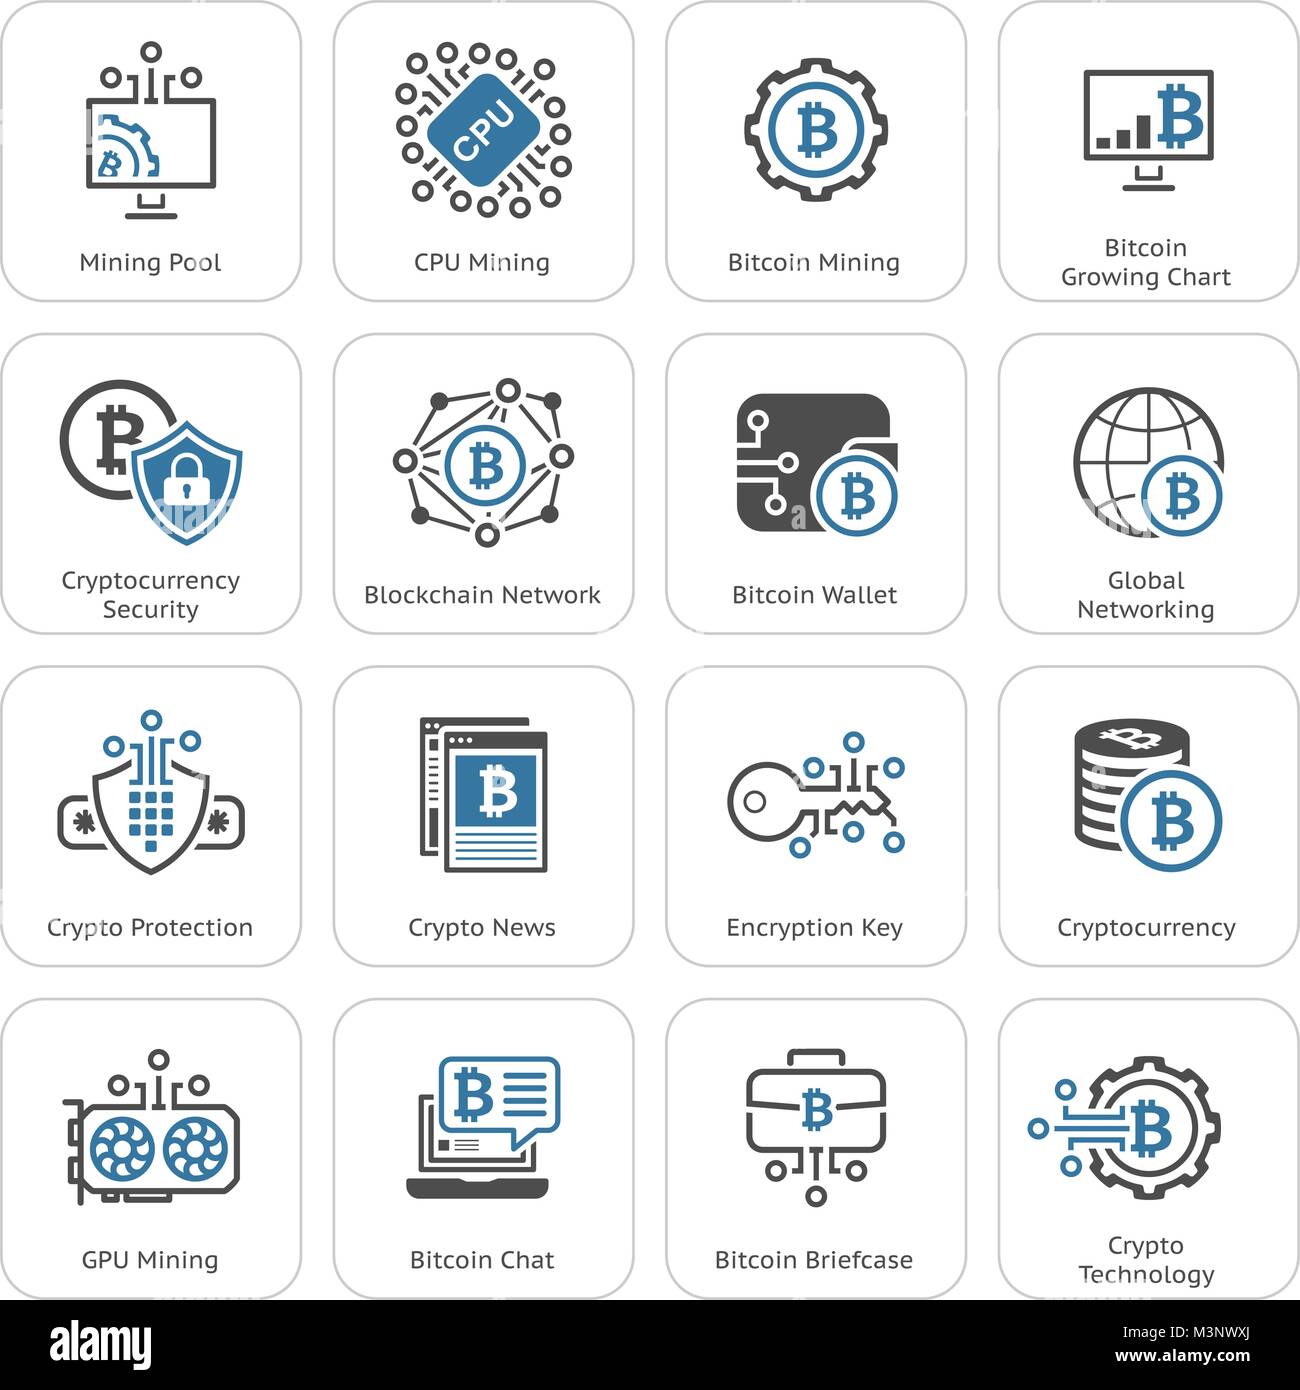 Bitcoin and Blockchain Cryptocurrency Icons. Stock Vector